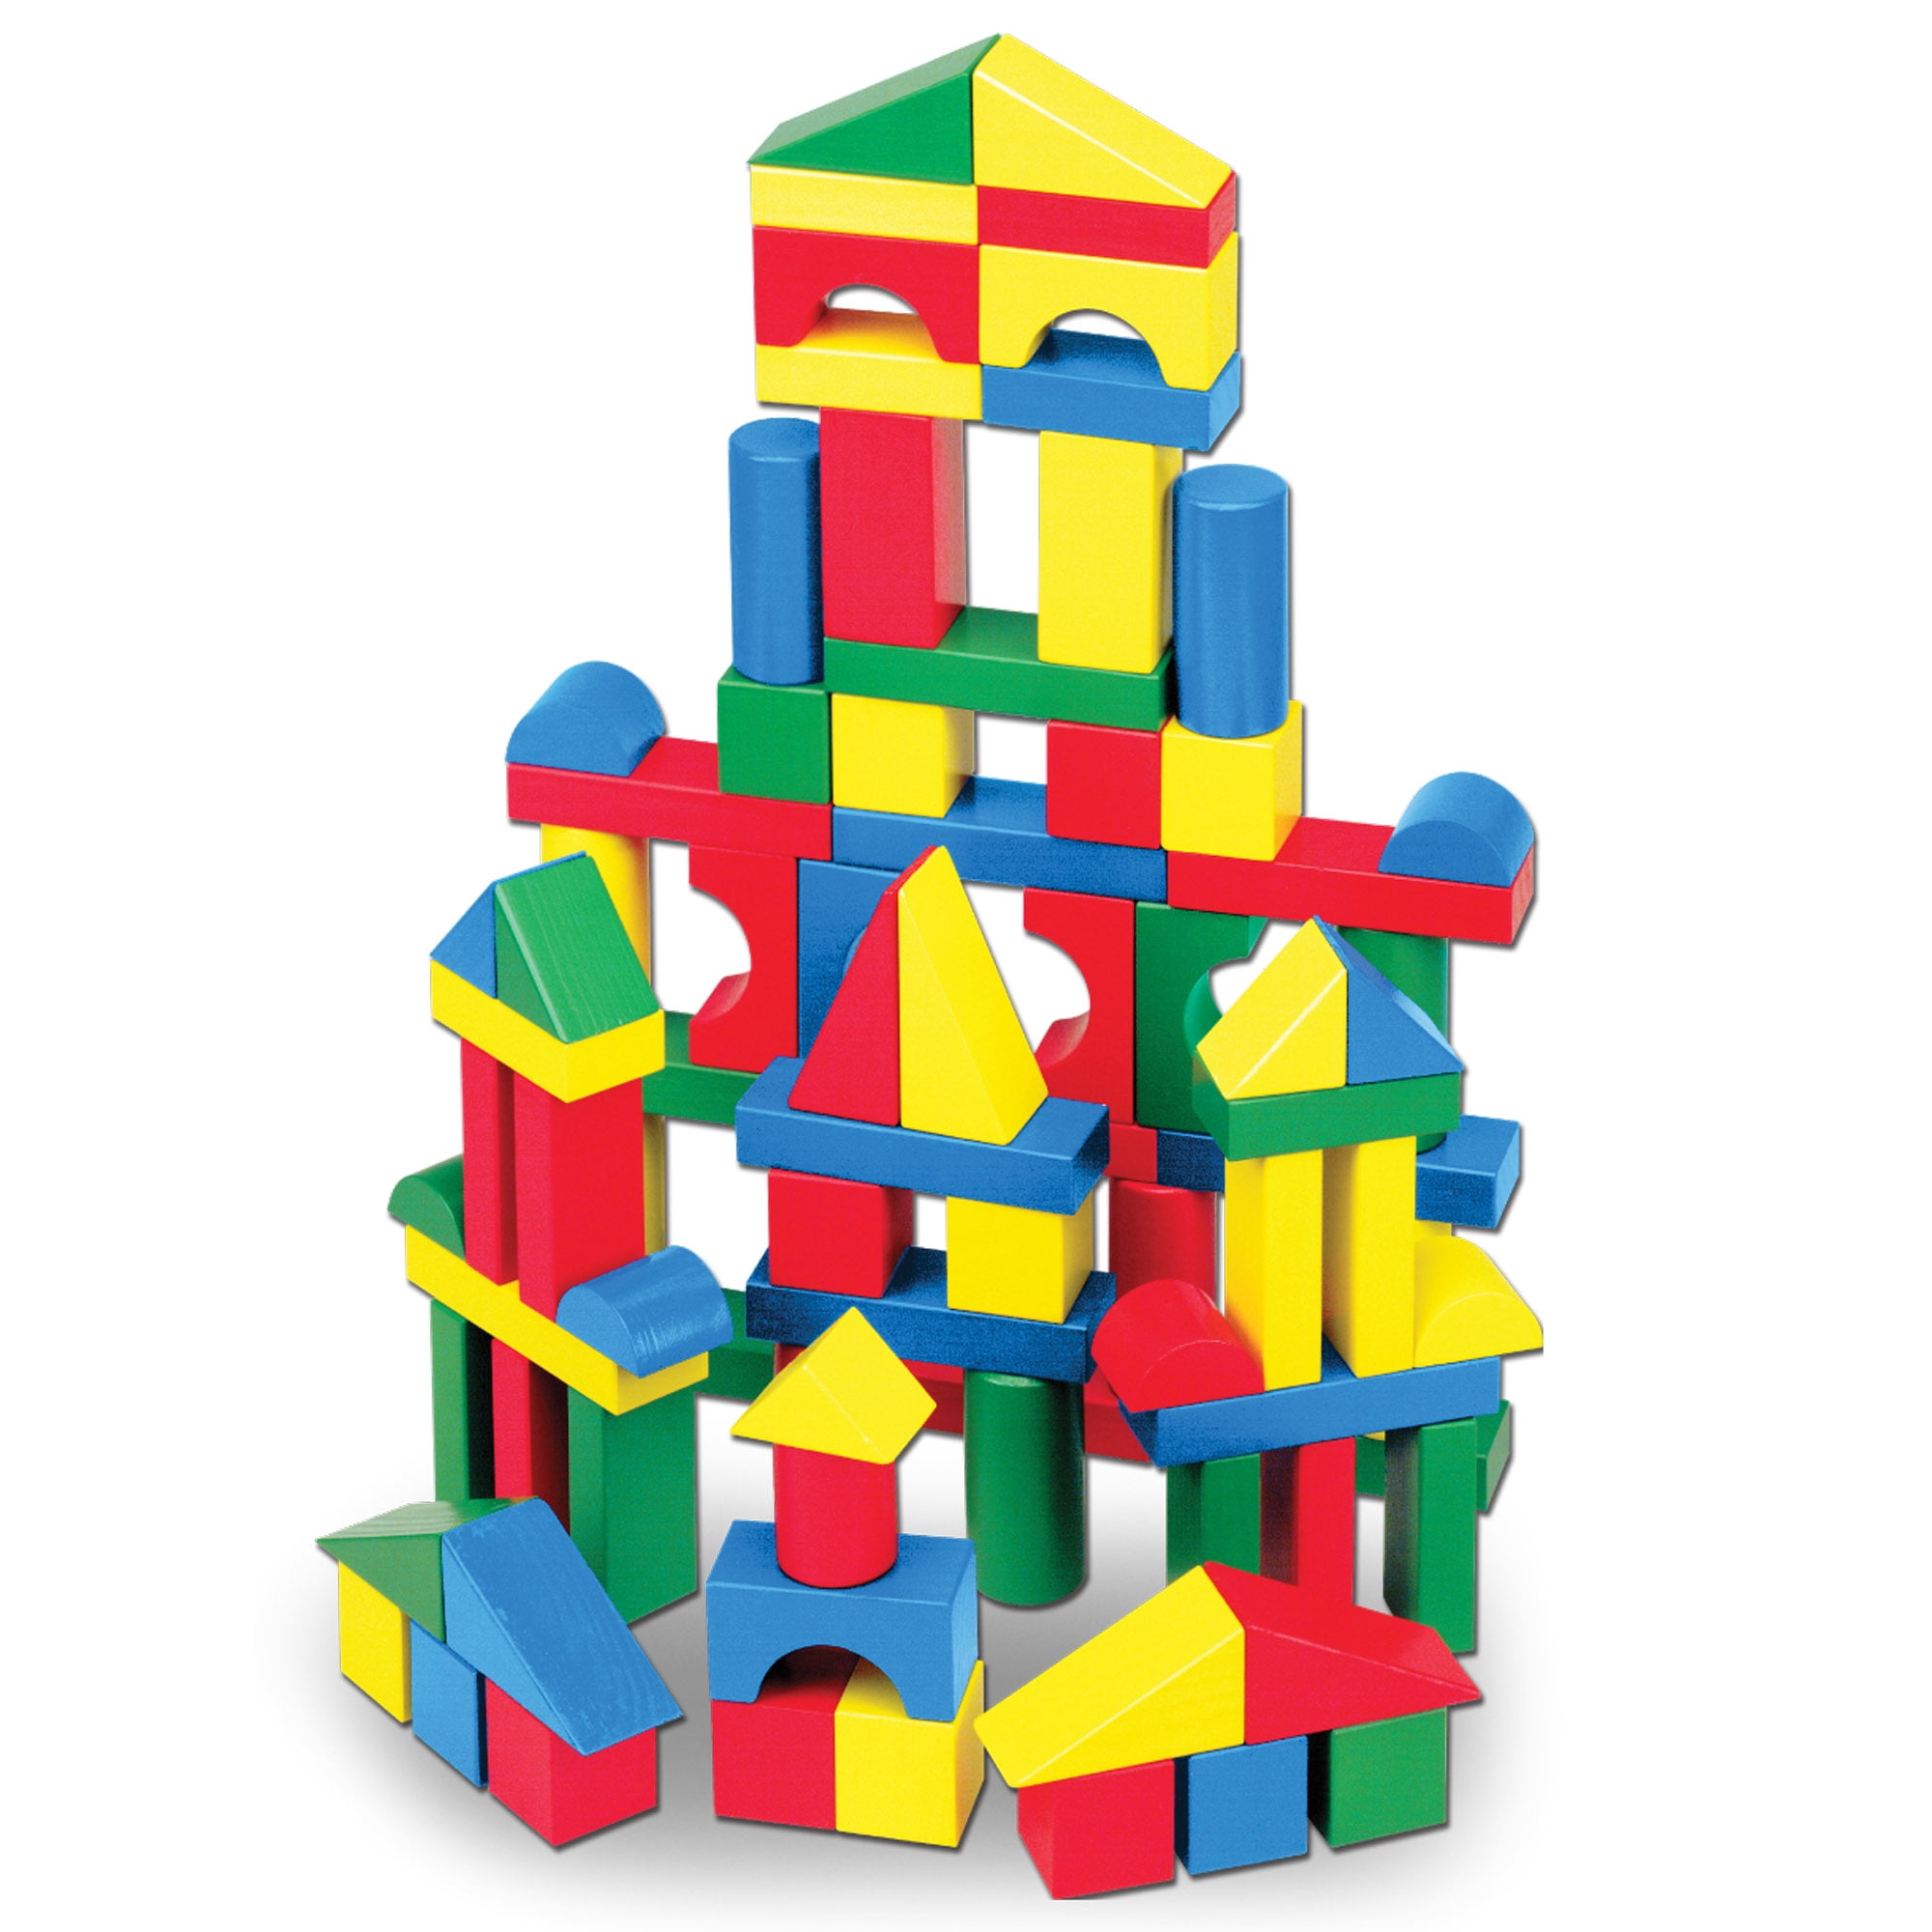 LEO & FRIENDS 120 Pieces Wooden Construction Building Blocks Set for Kids-Building Planks Set for Boys and Girls